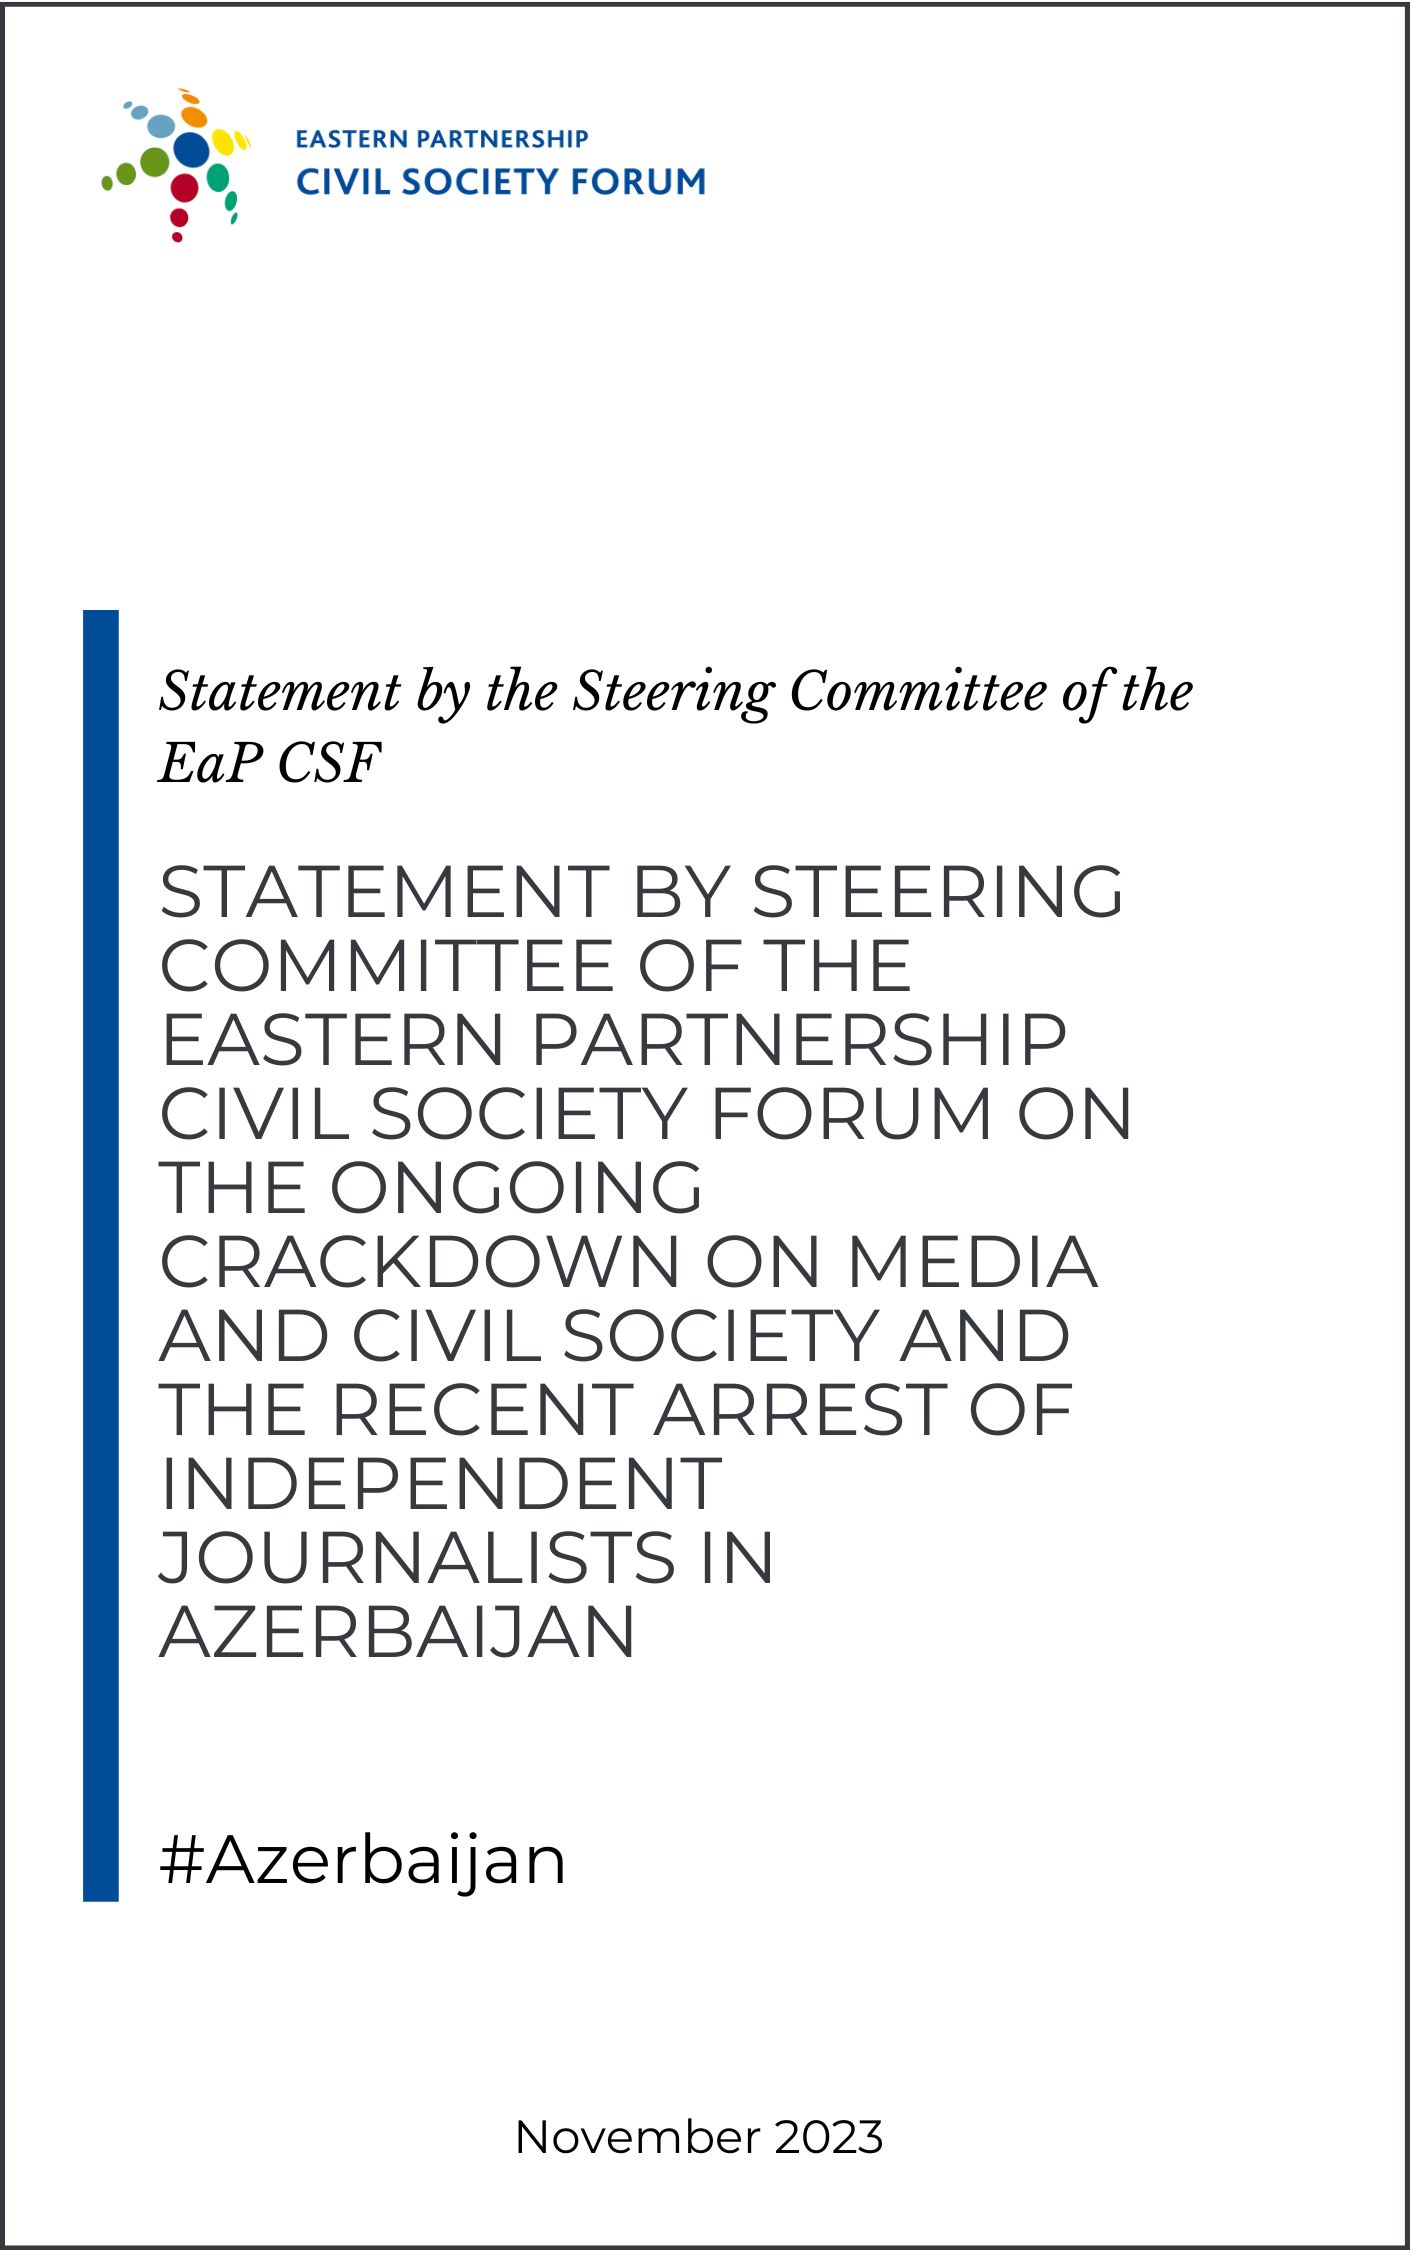 Statement by Steering Committee of the Eastern Partnership Civil Society Forum on the ongoing crackdown on media and civil society and the recent arrest of independent journalists in Azerbaijan